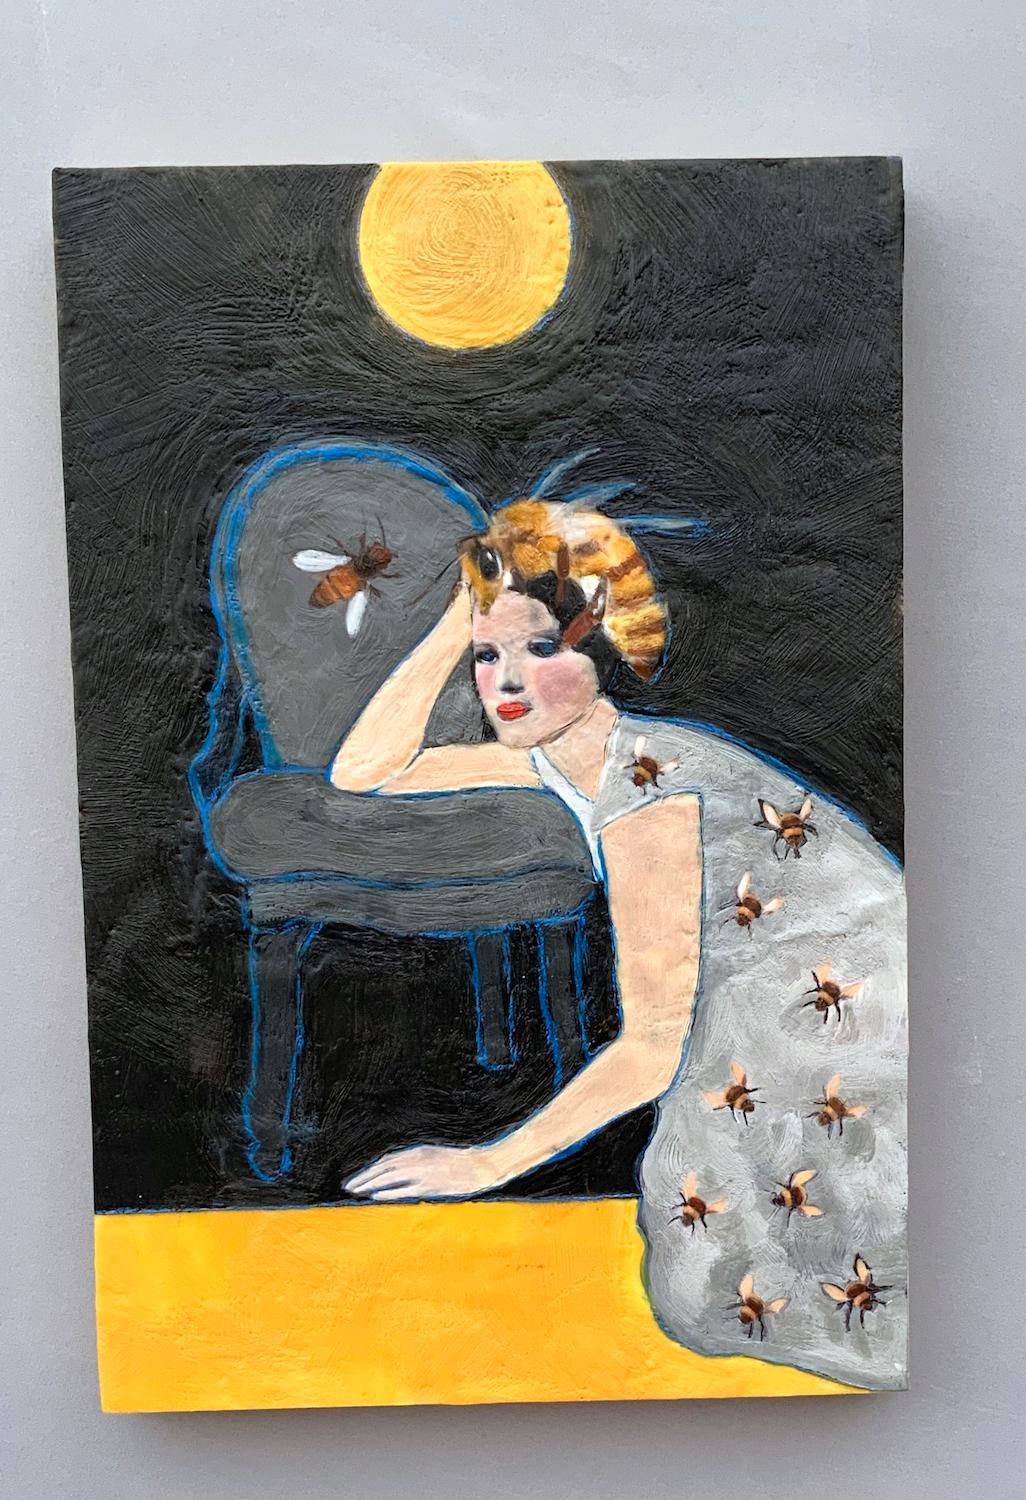 <p>Artist Comments<br>A woman rests against a chair under a full yellow moon. Her dress features a bee print, while a large bee rests on her head. 